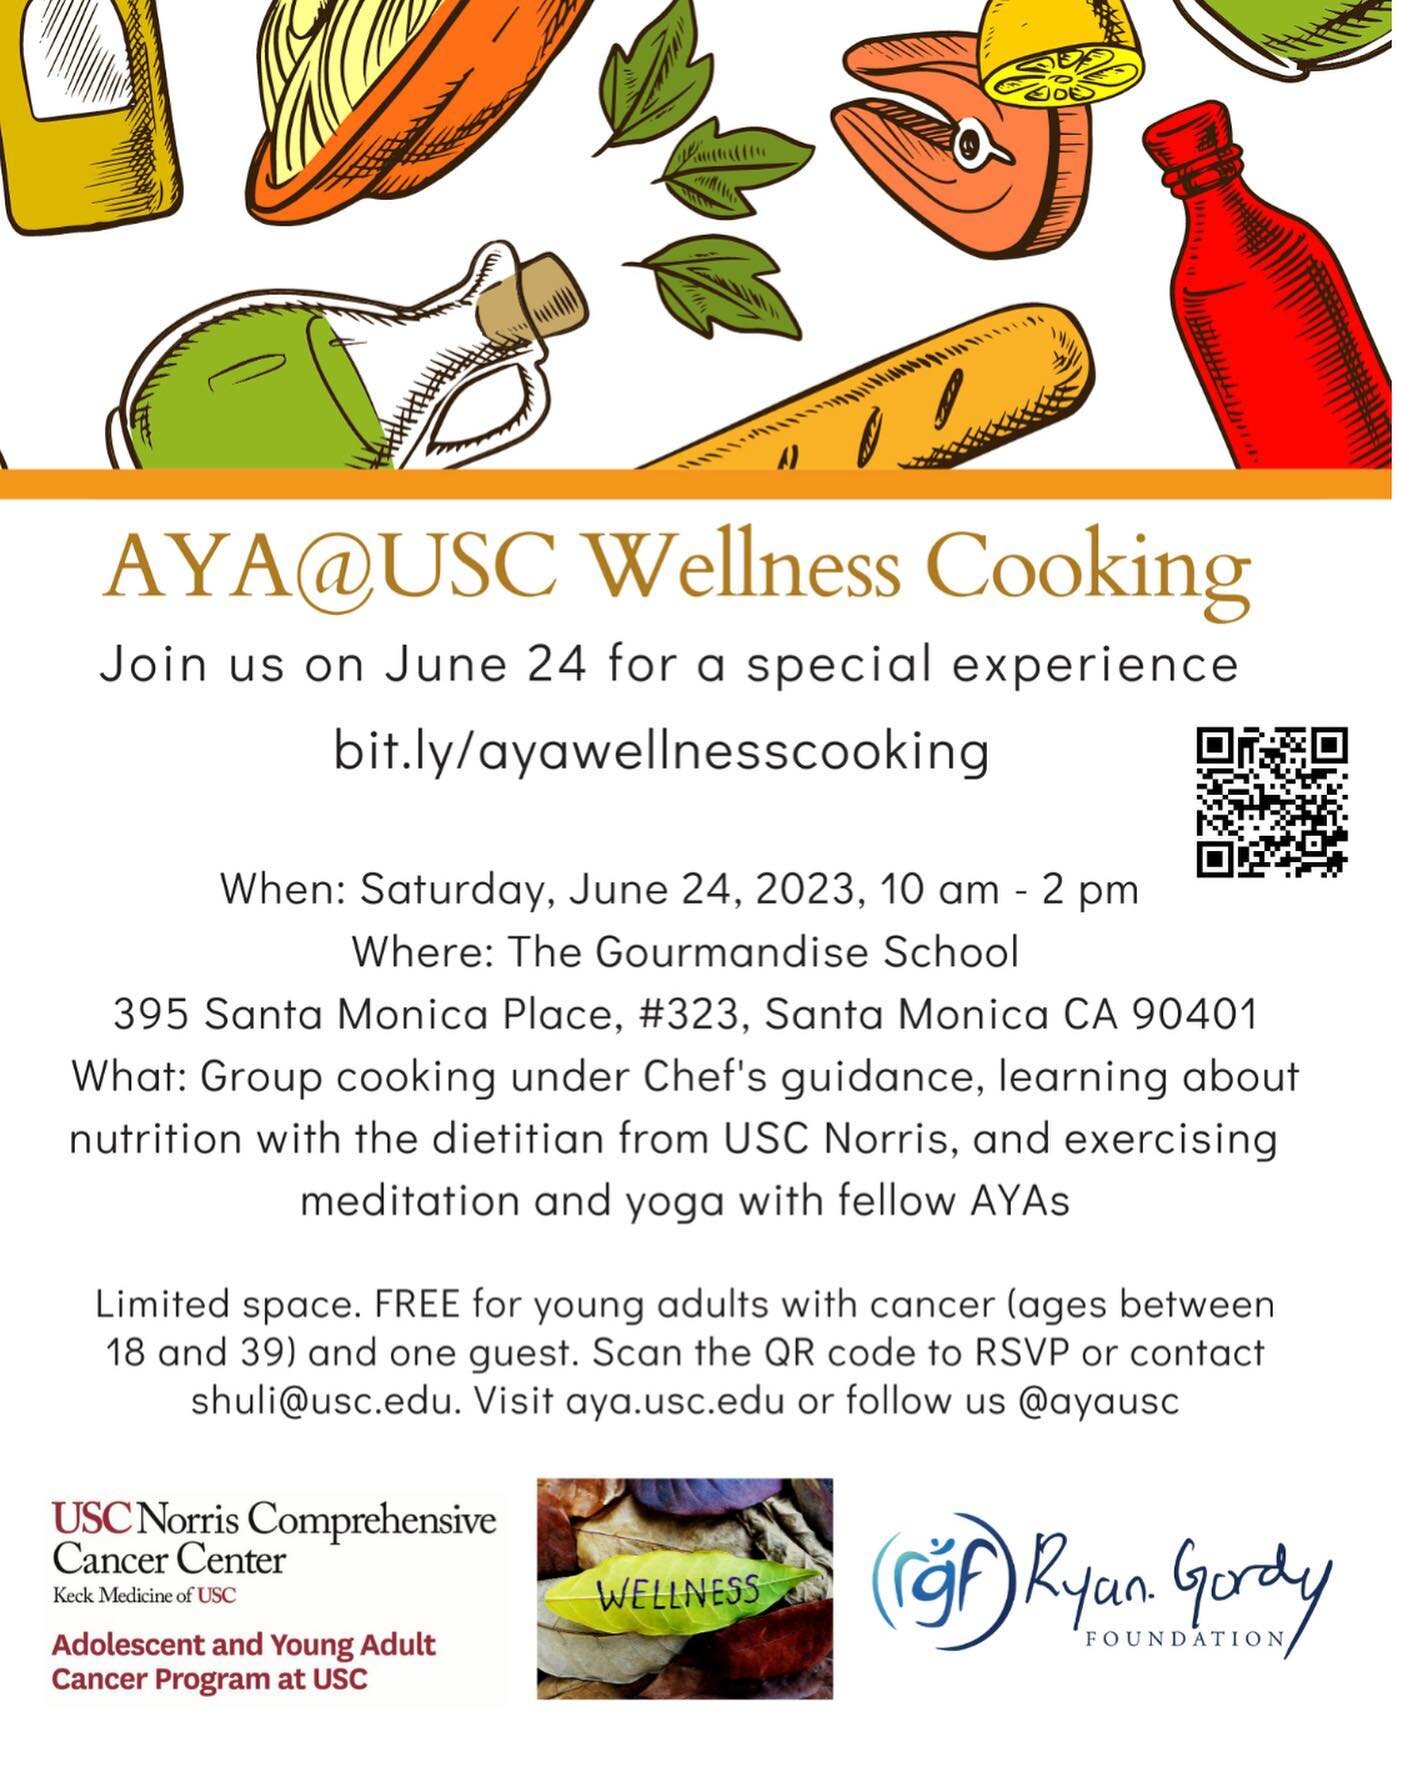 Looking forward to our upcoming wellness cooking workshop on Saturday, June 24 @ryangordyfoundation at the beautiful Santa Monica Beach. Only a few spots left. Visit aya.usc.edu for more information or email shuli@usc.edu.  @uscnorriscancercenter @us